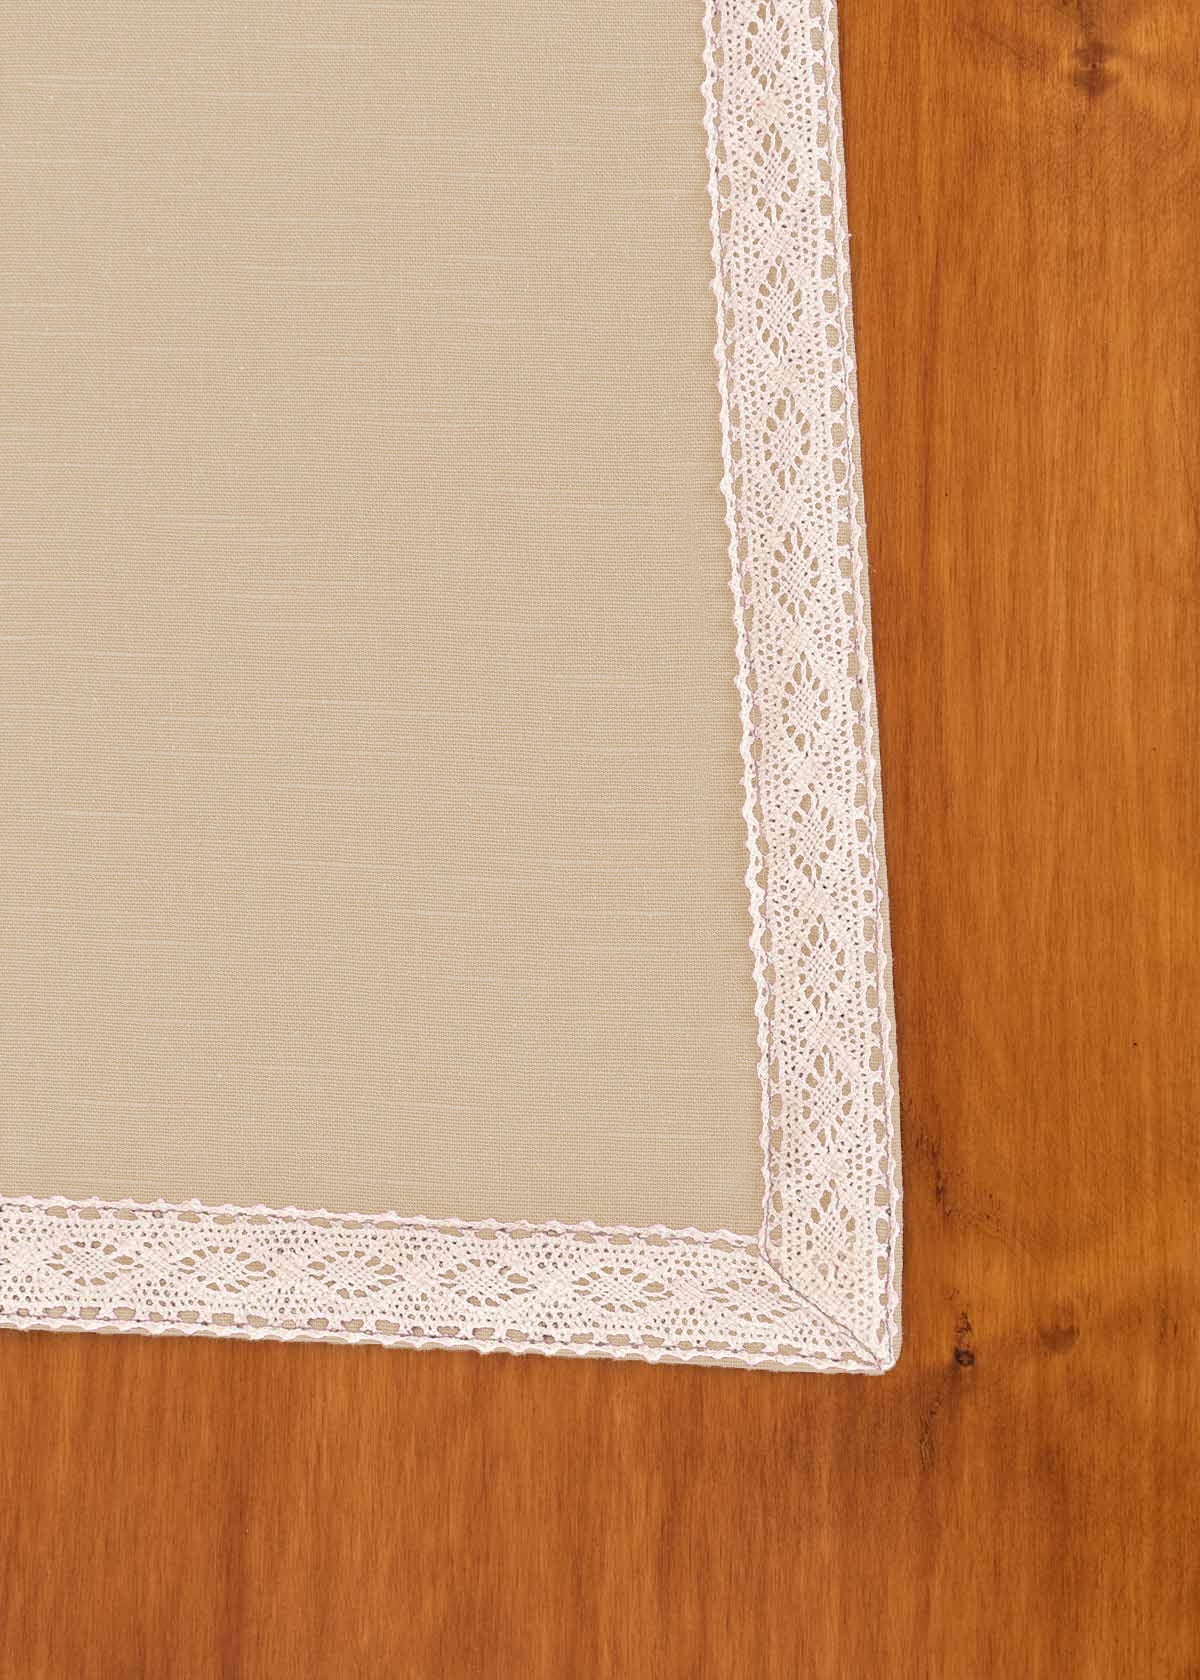 Solid Cream 100% cotton plain neutral table cloth for 4 seater or 6 seater dining with lace border